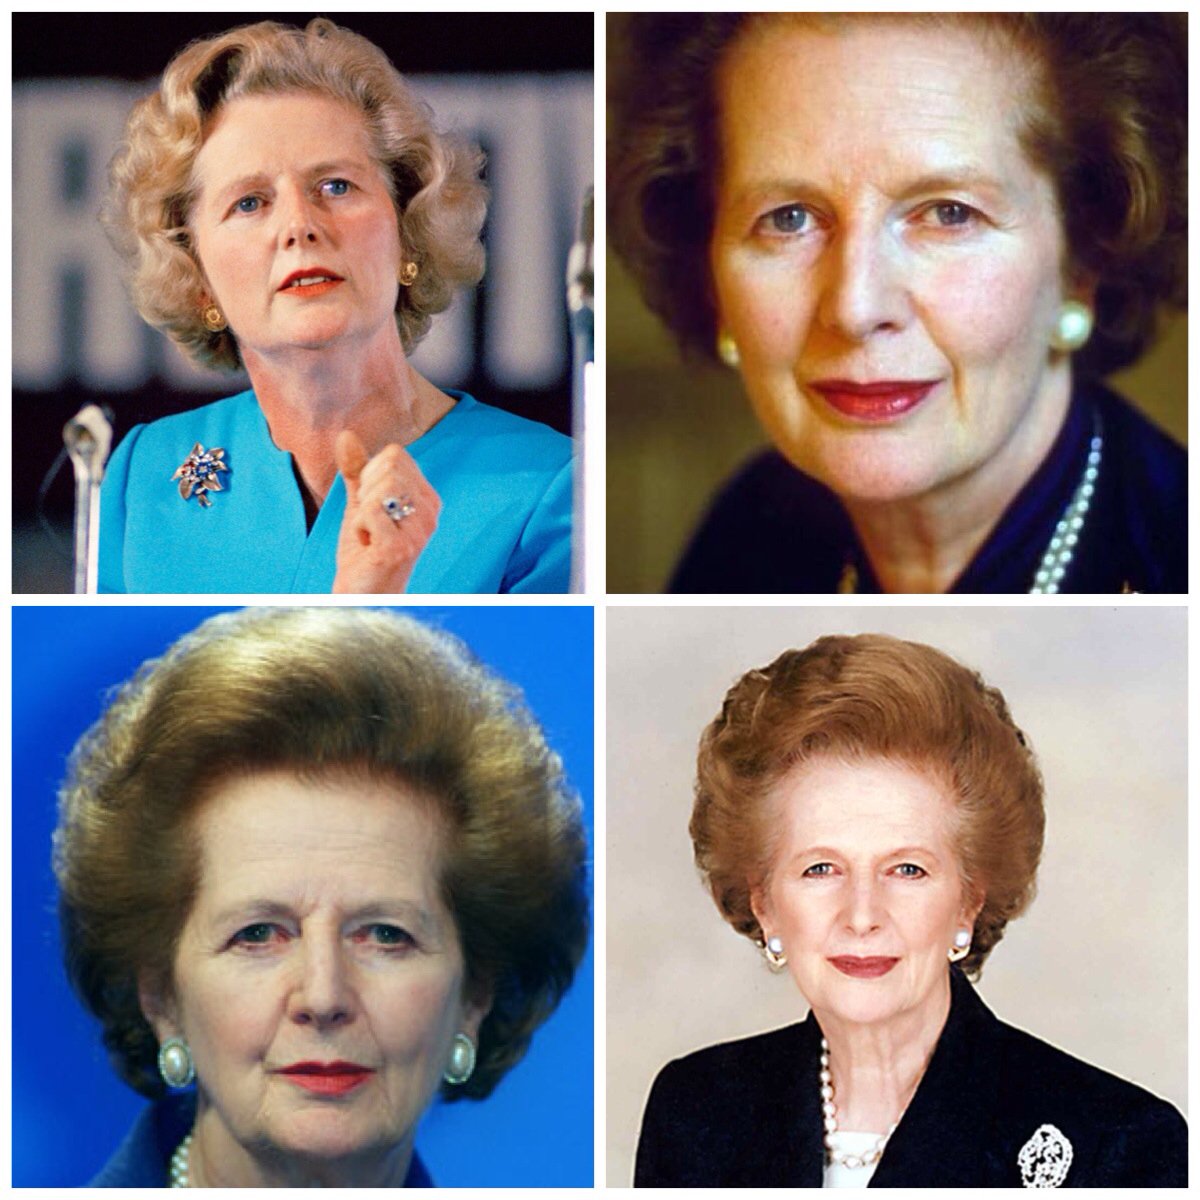 🇬🇧 The Great Margaret Thatcher

An outstanding, patriotic, transformational British prime minister admired around the world 🇬🇧